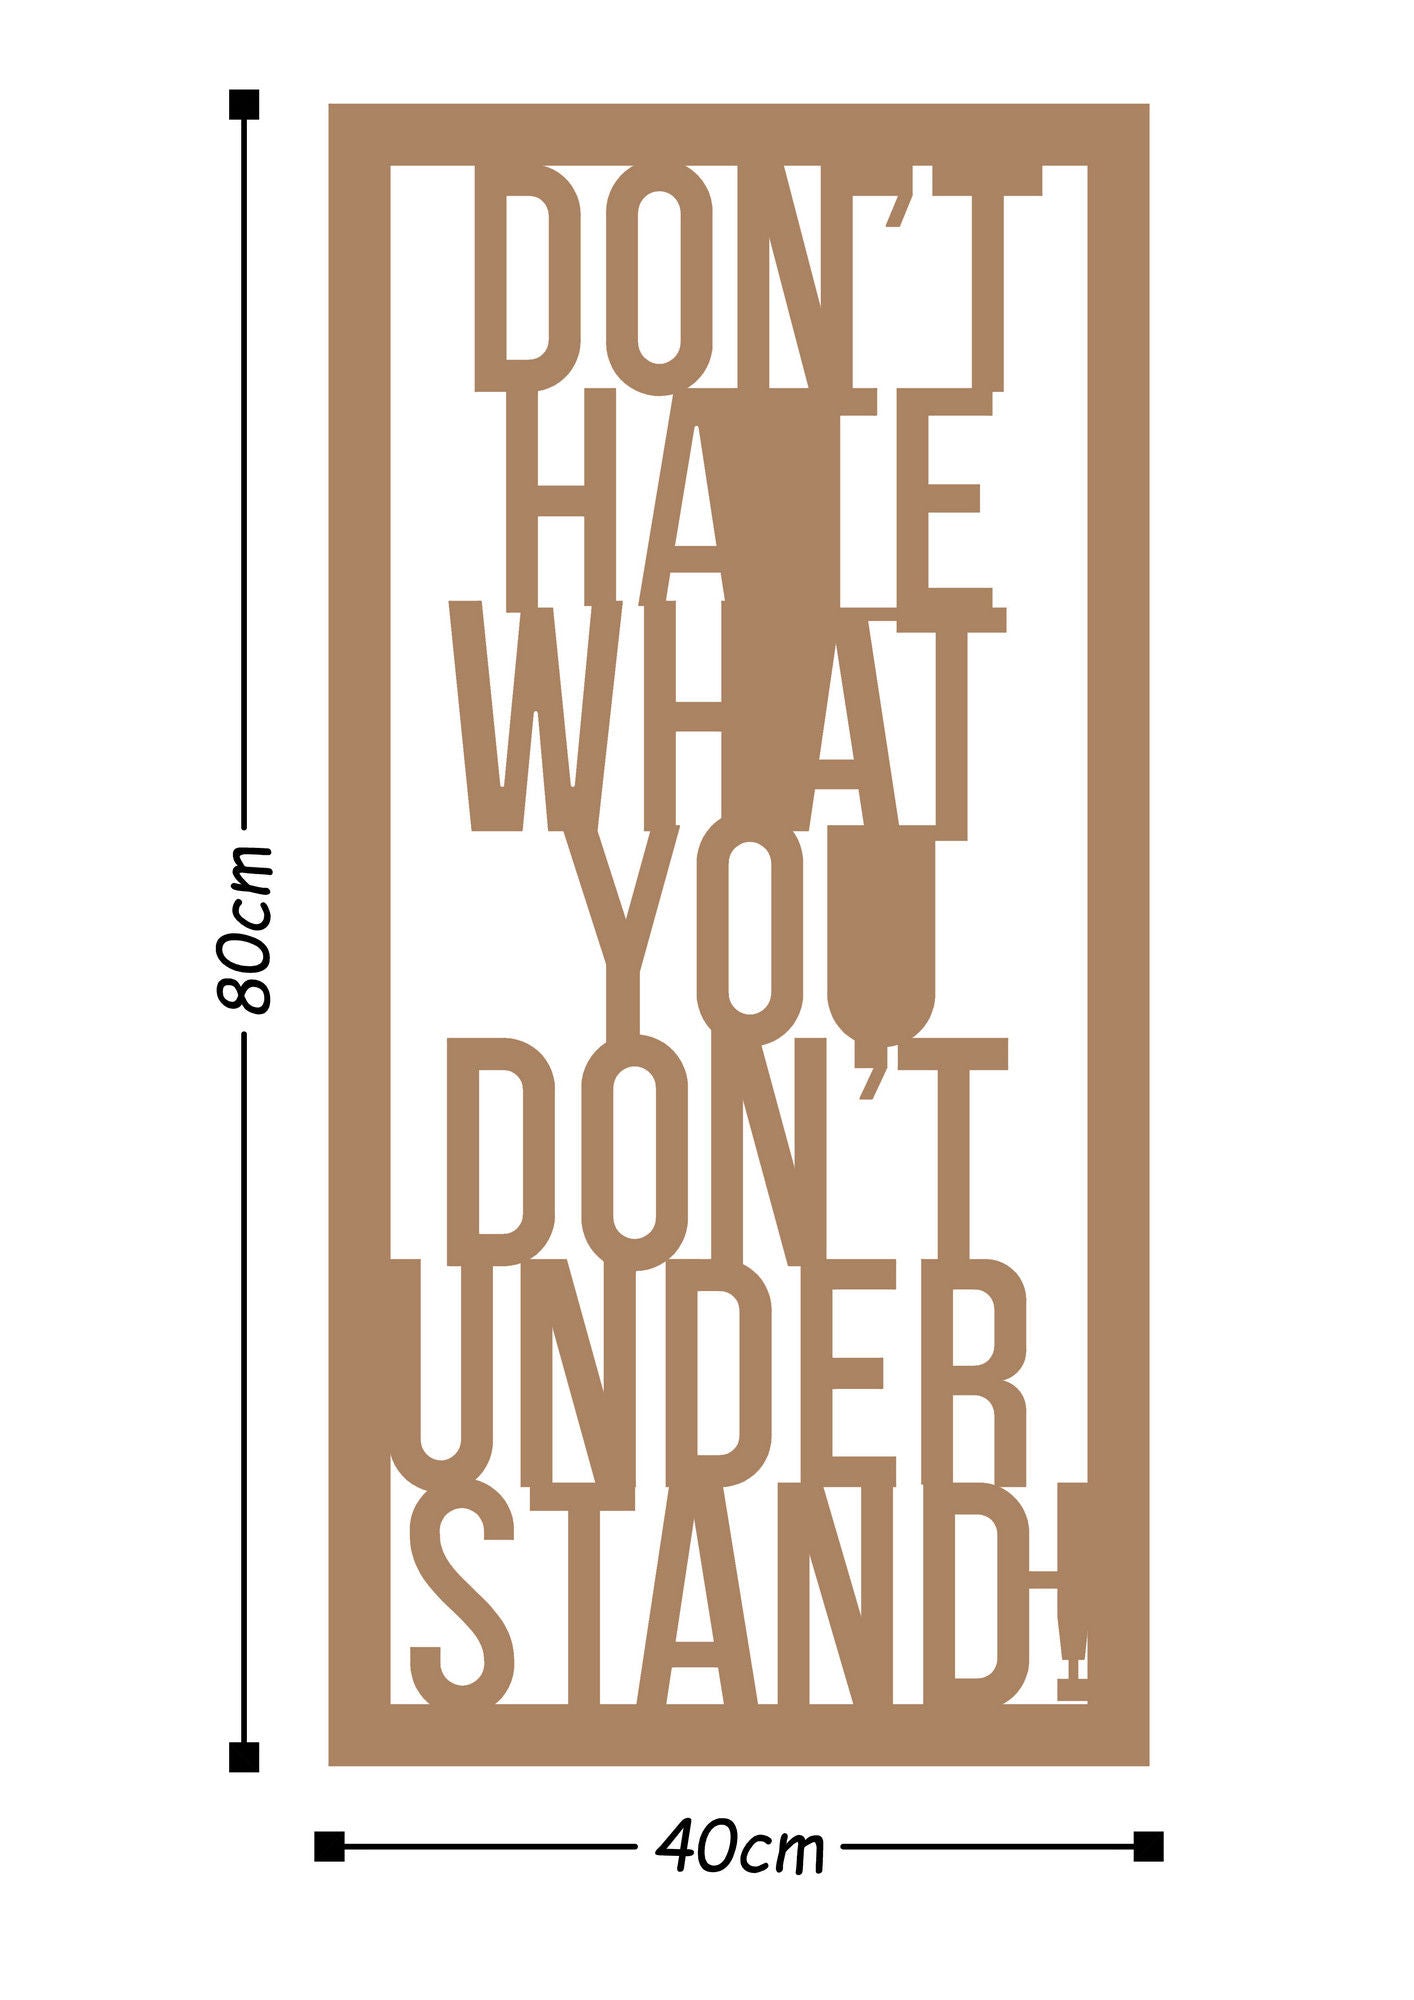 Dont Hate Whatyou Dont Under Stand - Copper - Decorative Metal Wall Accessory